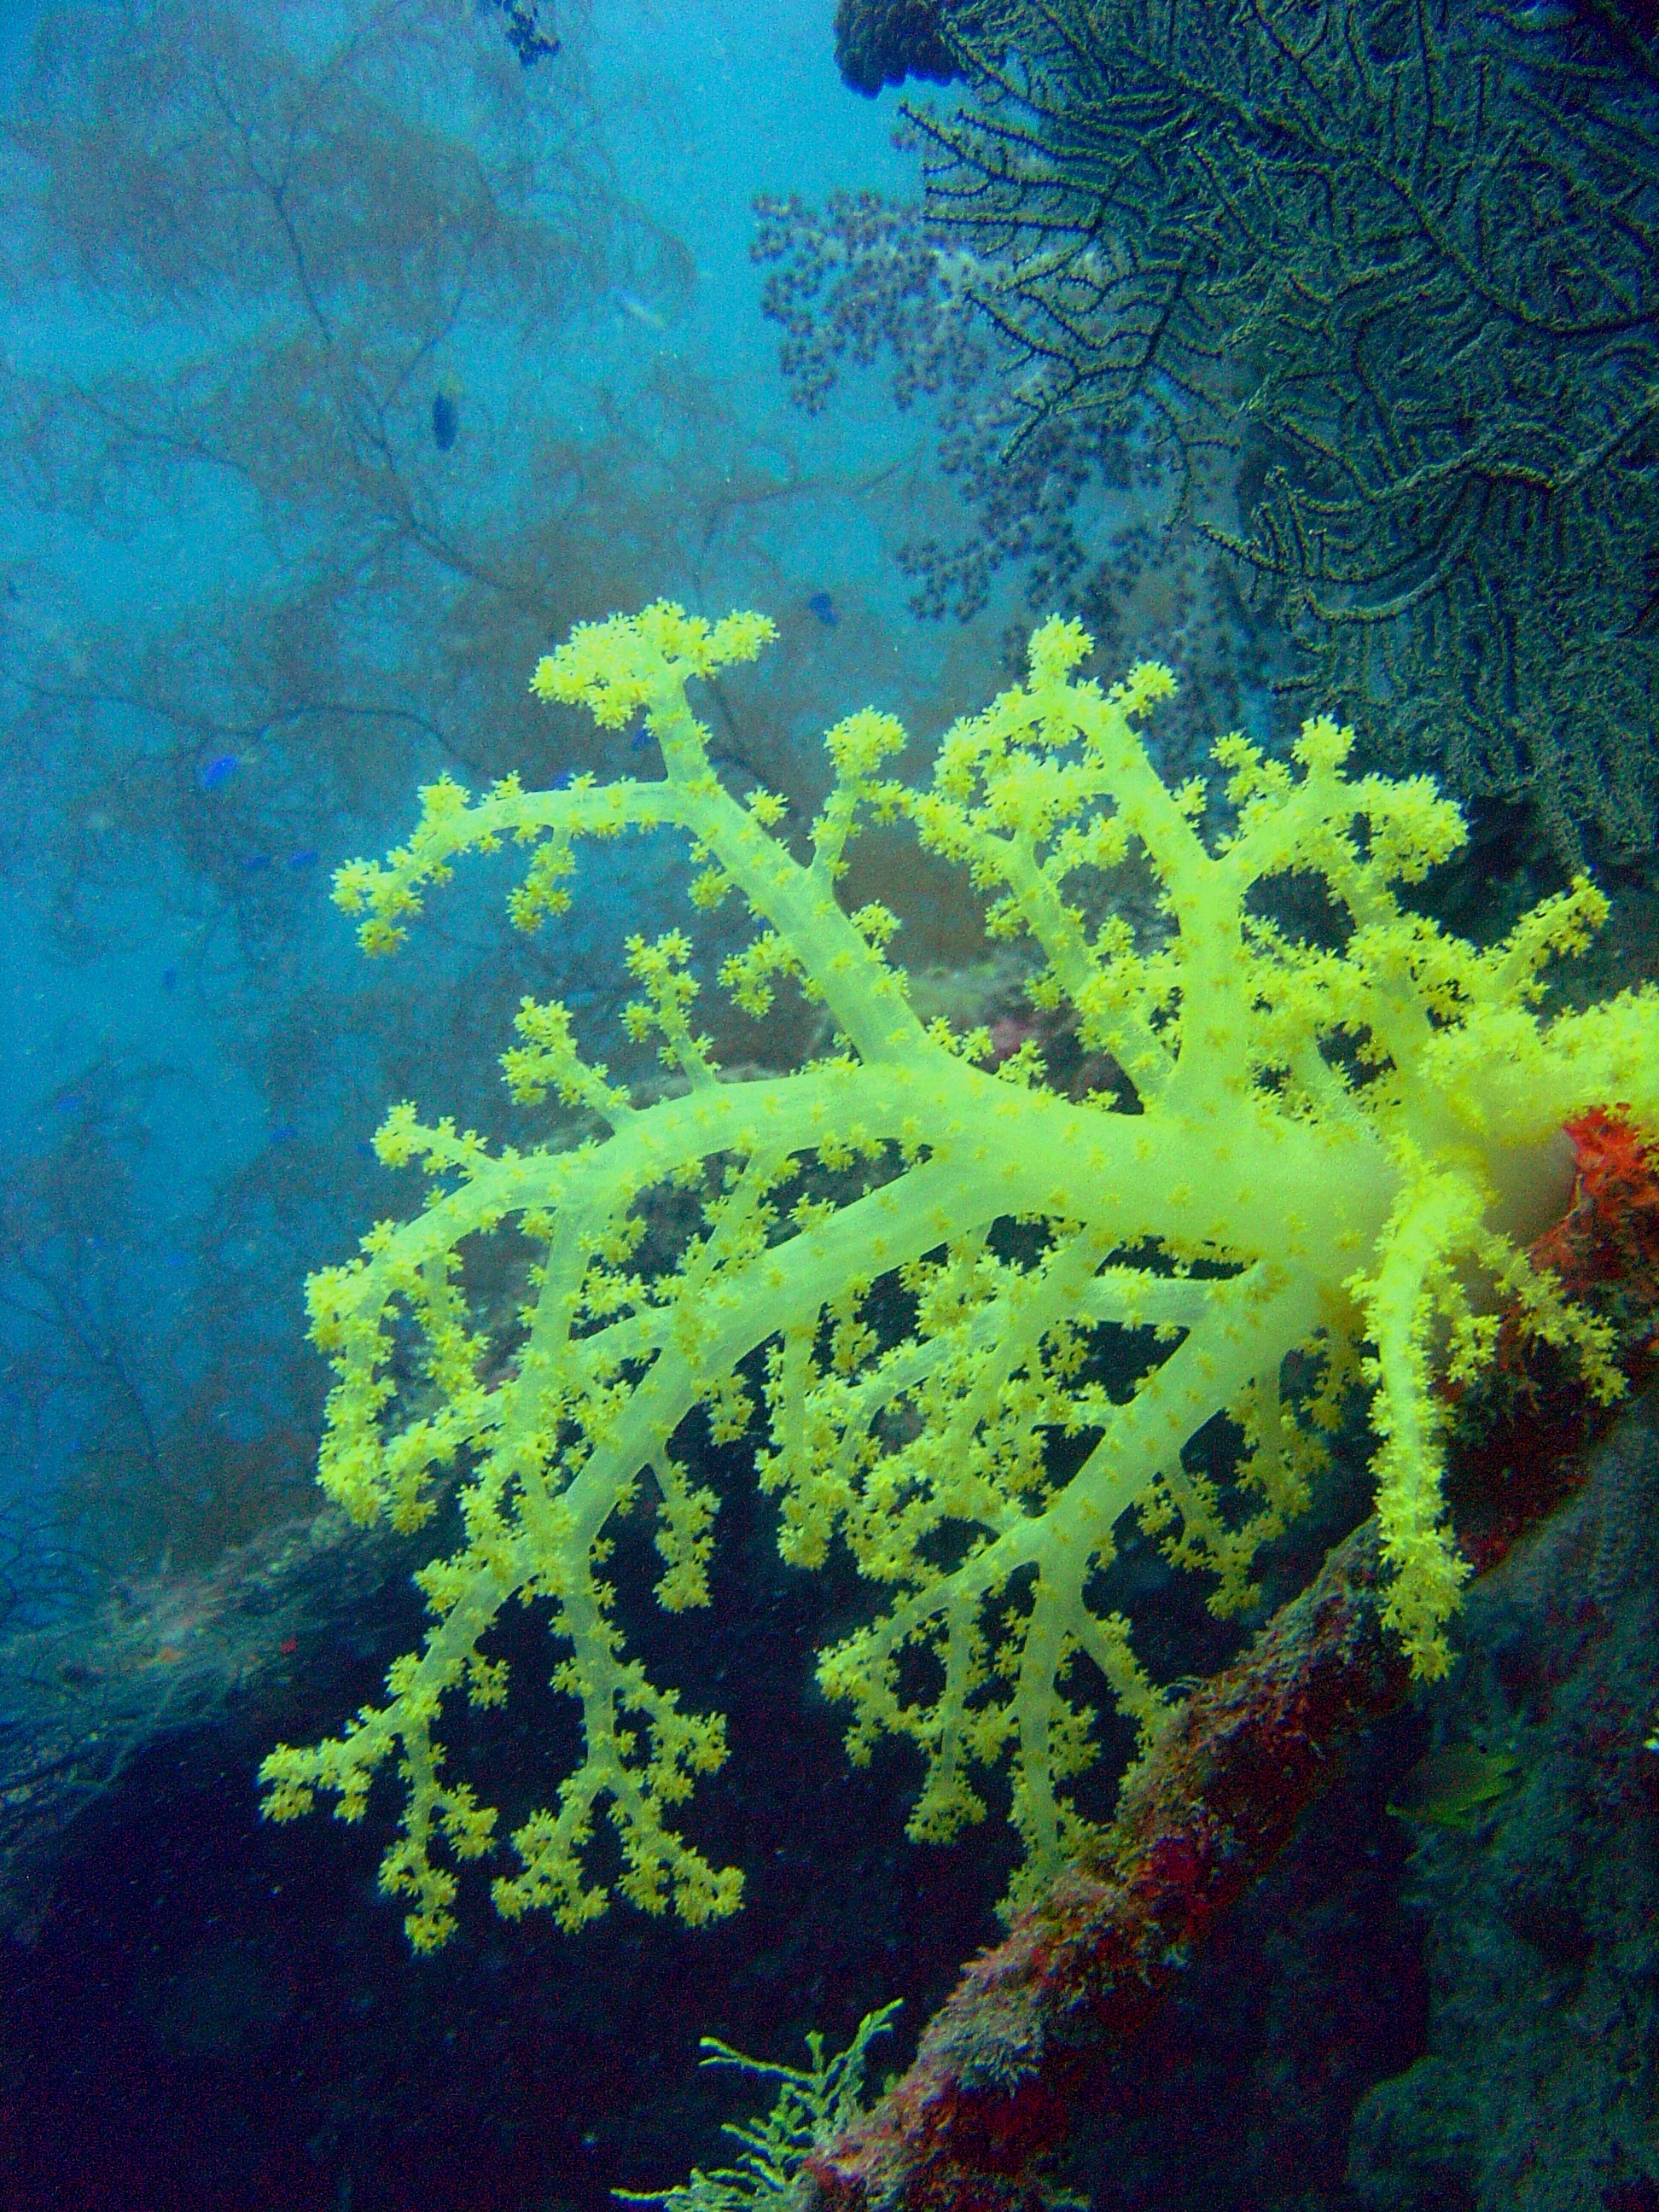 Reef0890 - Flickr - NOAA Photo Library